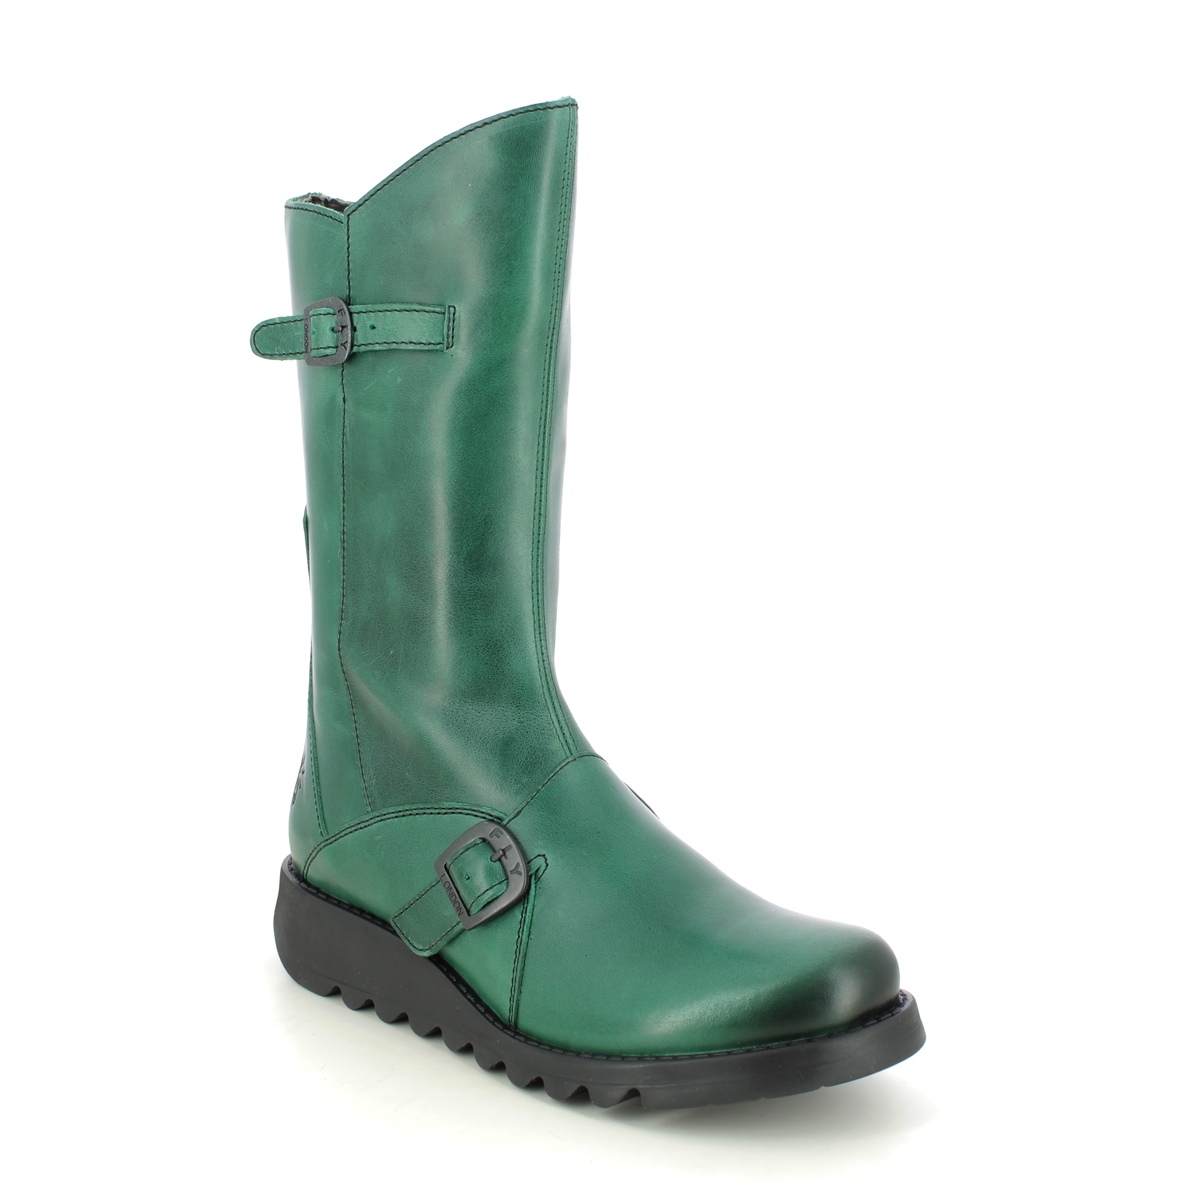 Fly London Mes 2 Green Womens Mid Calf Boots P142913-033 in a Plain Leather in Size 41